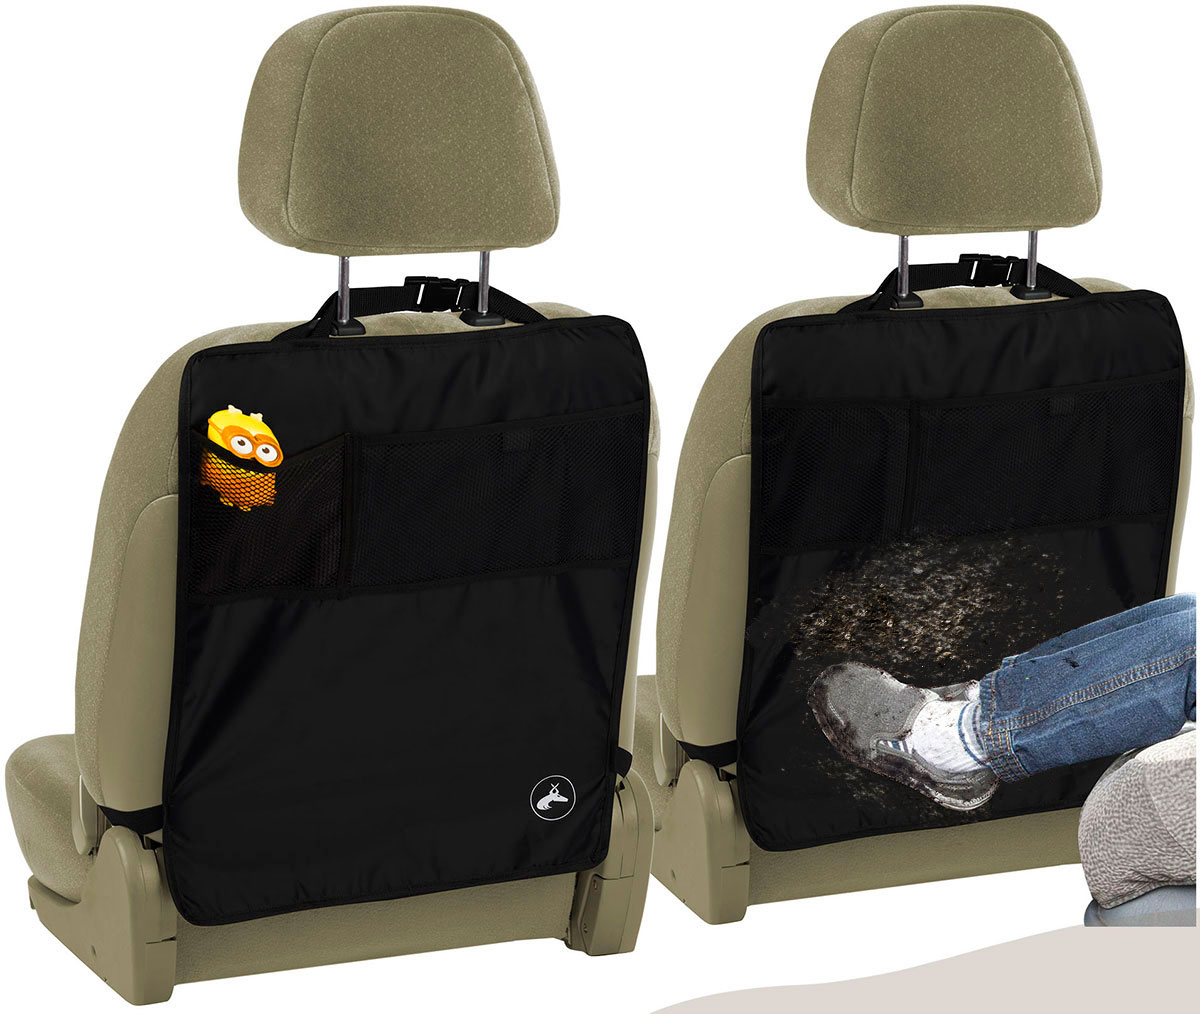 Oxgord Infant Seat Univesal Fit Protective Car Seat Cover for Car Seat, 2 Piece with Storage Pockets, Black - image 3 of 4